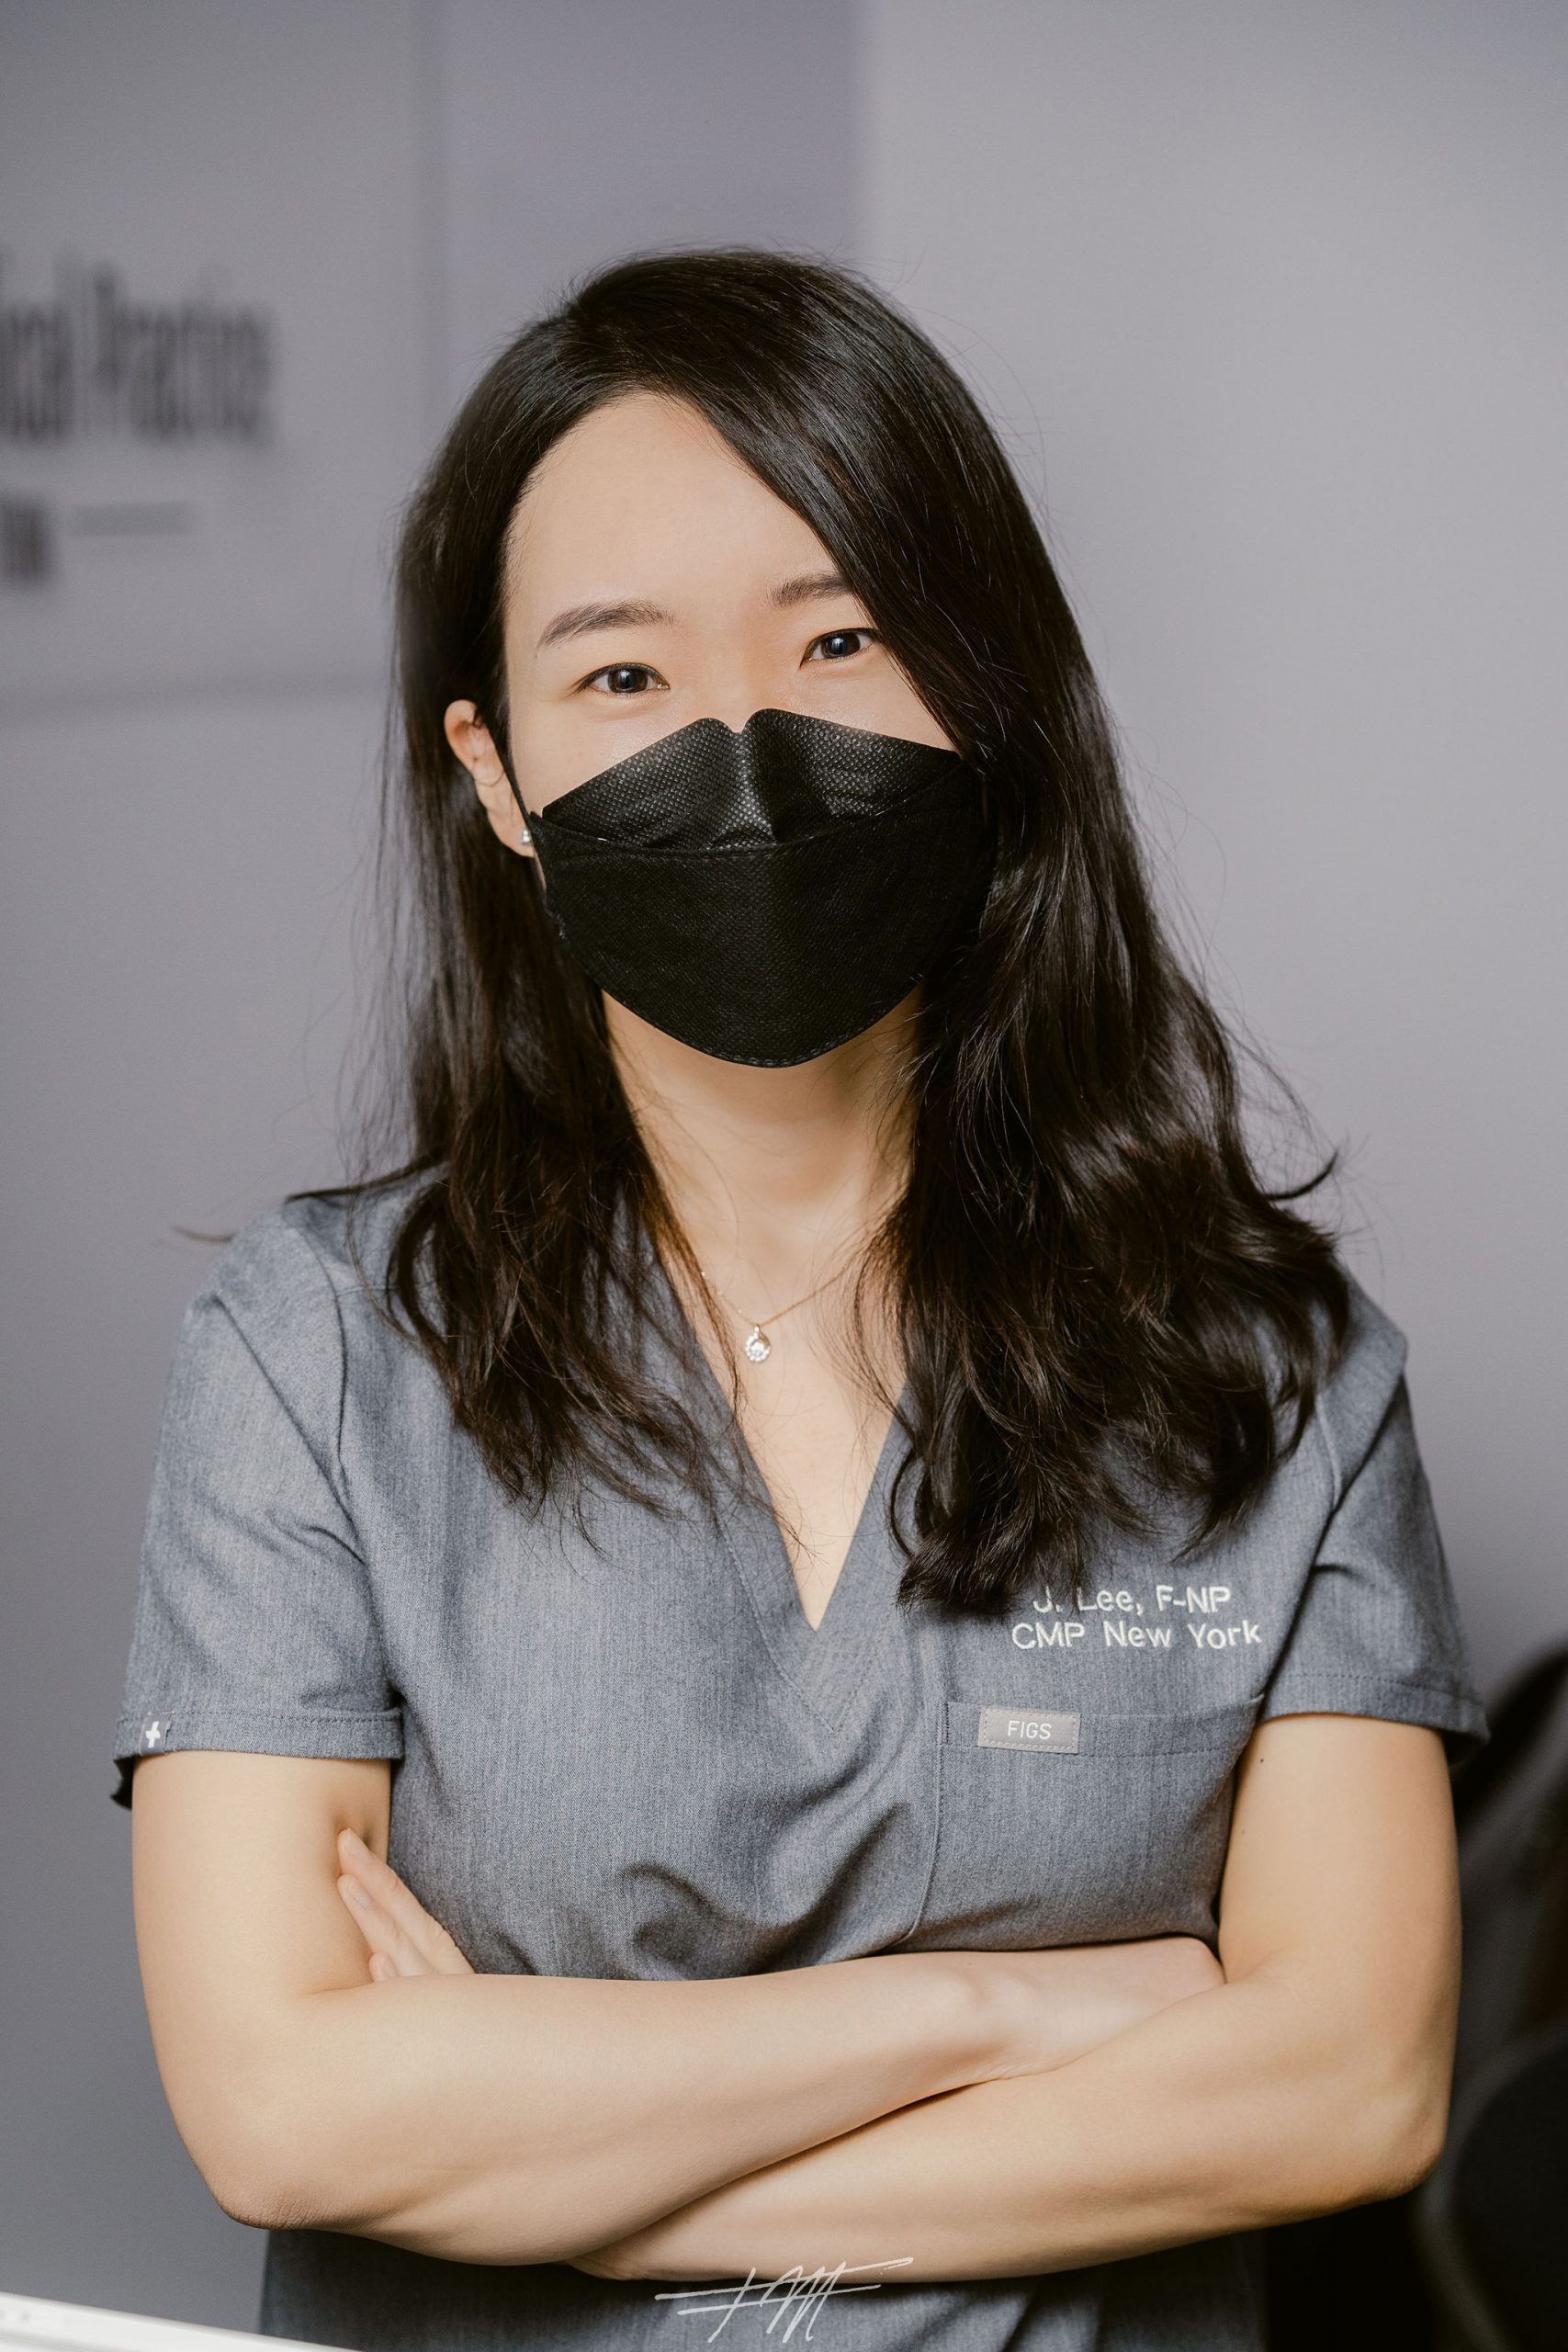 Jane Lee, F-NP - NYC GYN | Cohen Medical Practice